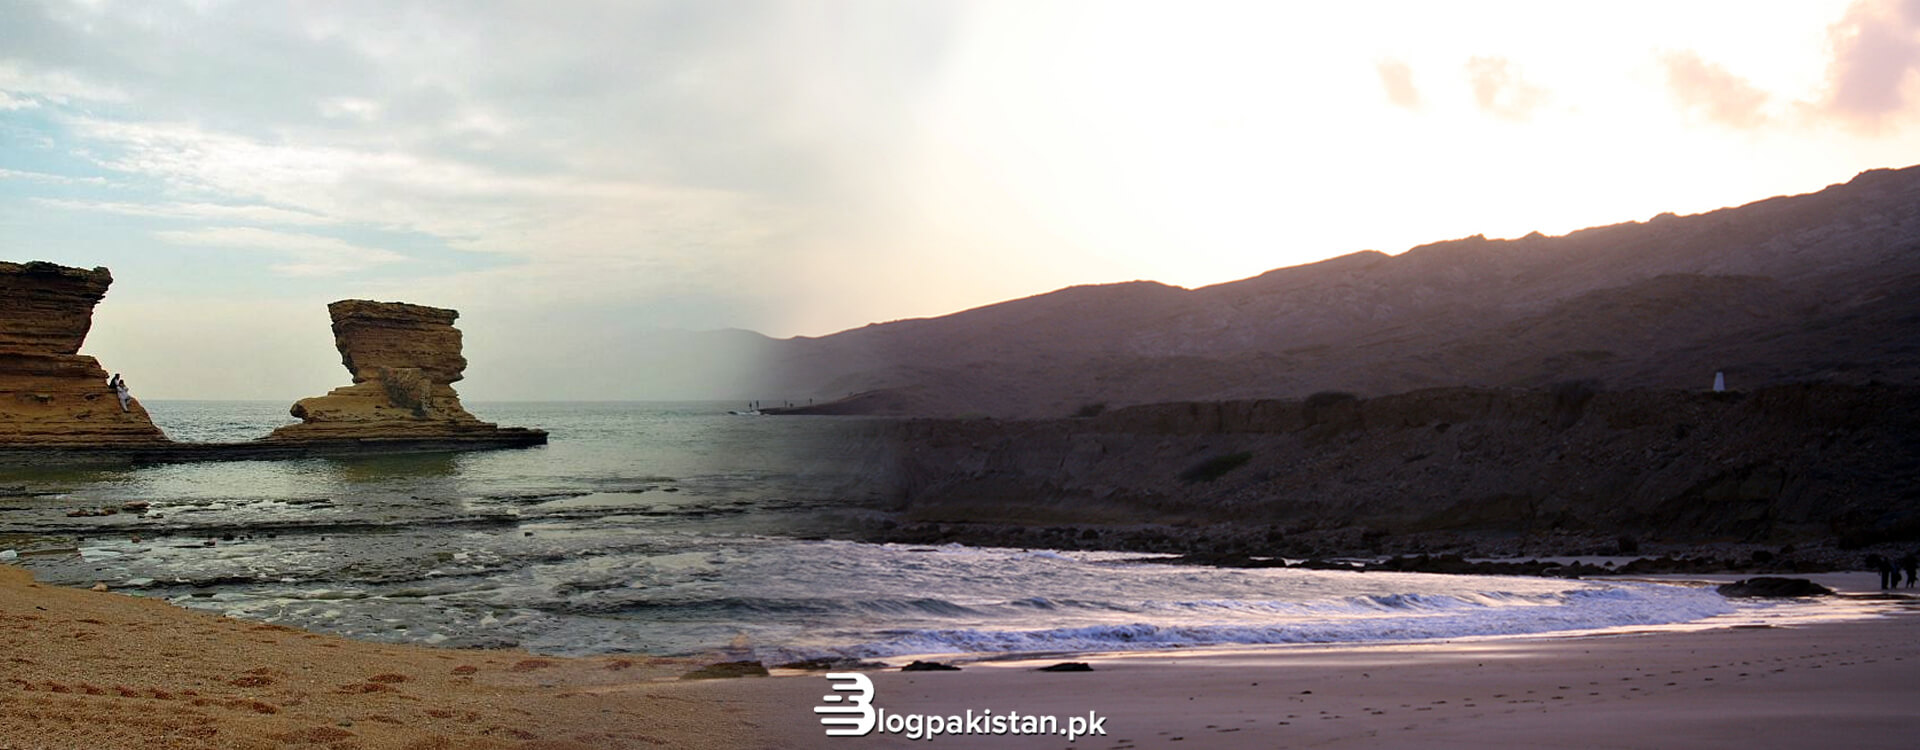 17 Best Beaches in Pakistan That Should Be On Your Travel List